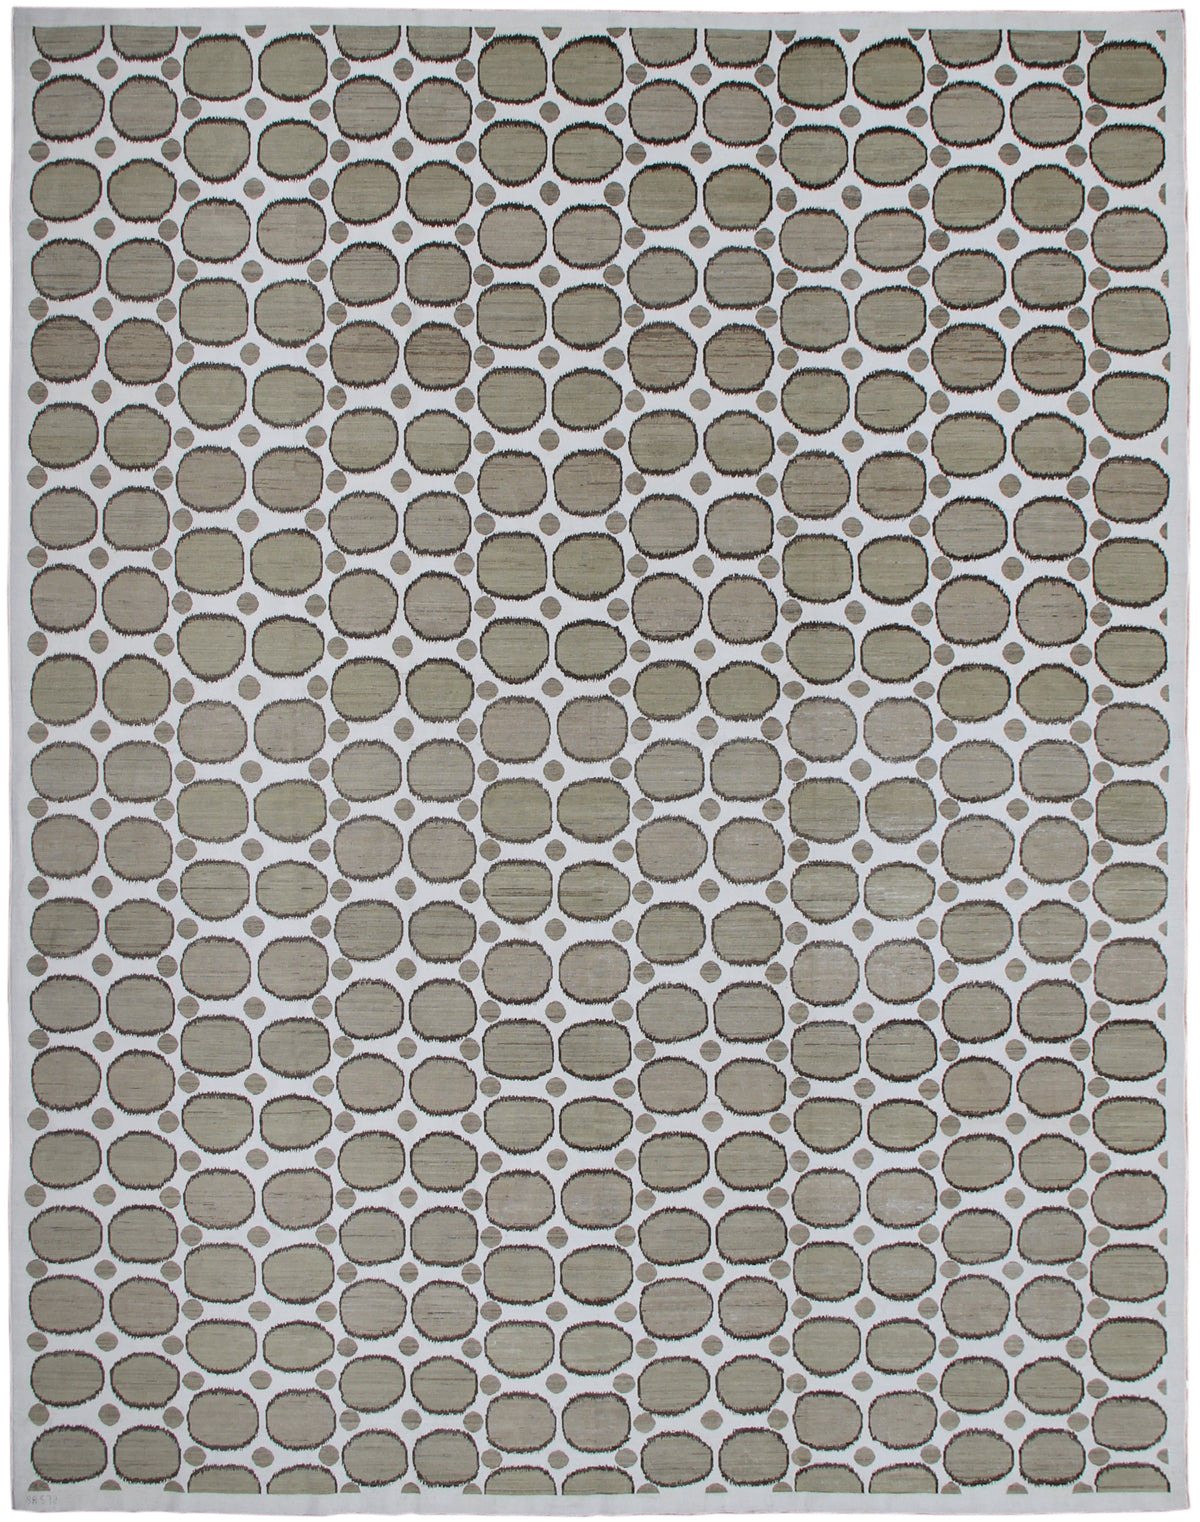 13'x10' Very Fine Cotton and Woll Ariana Modern Design Rug